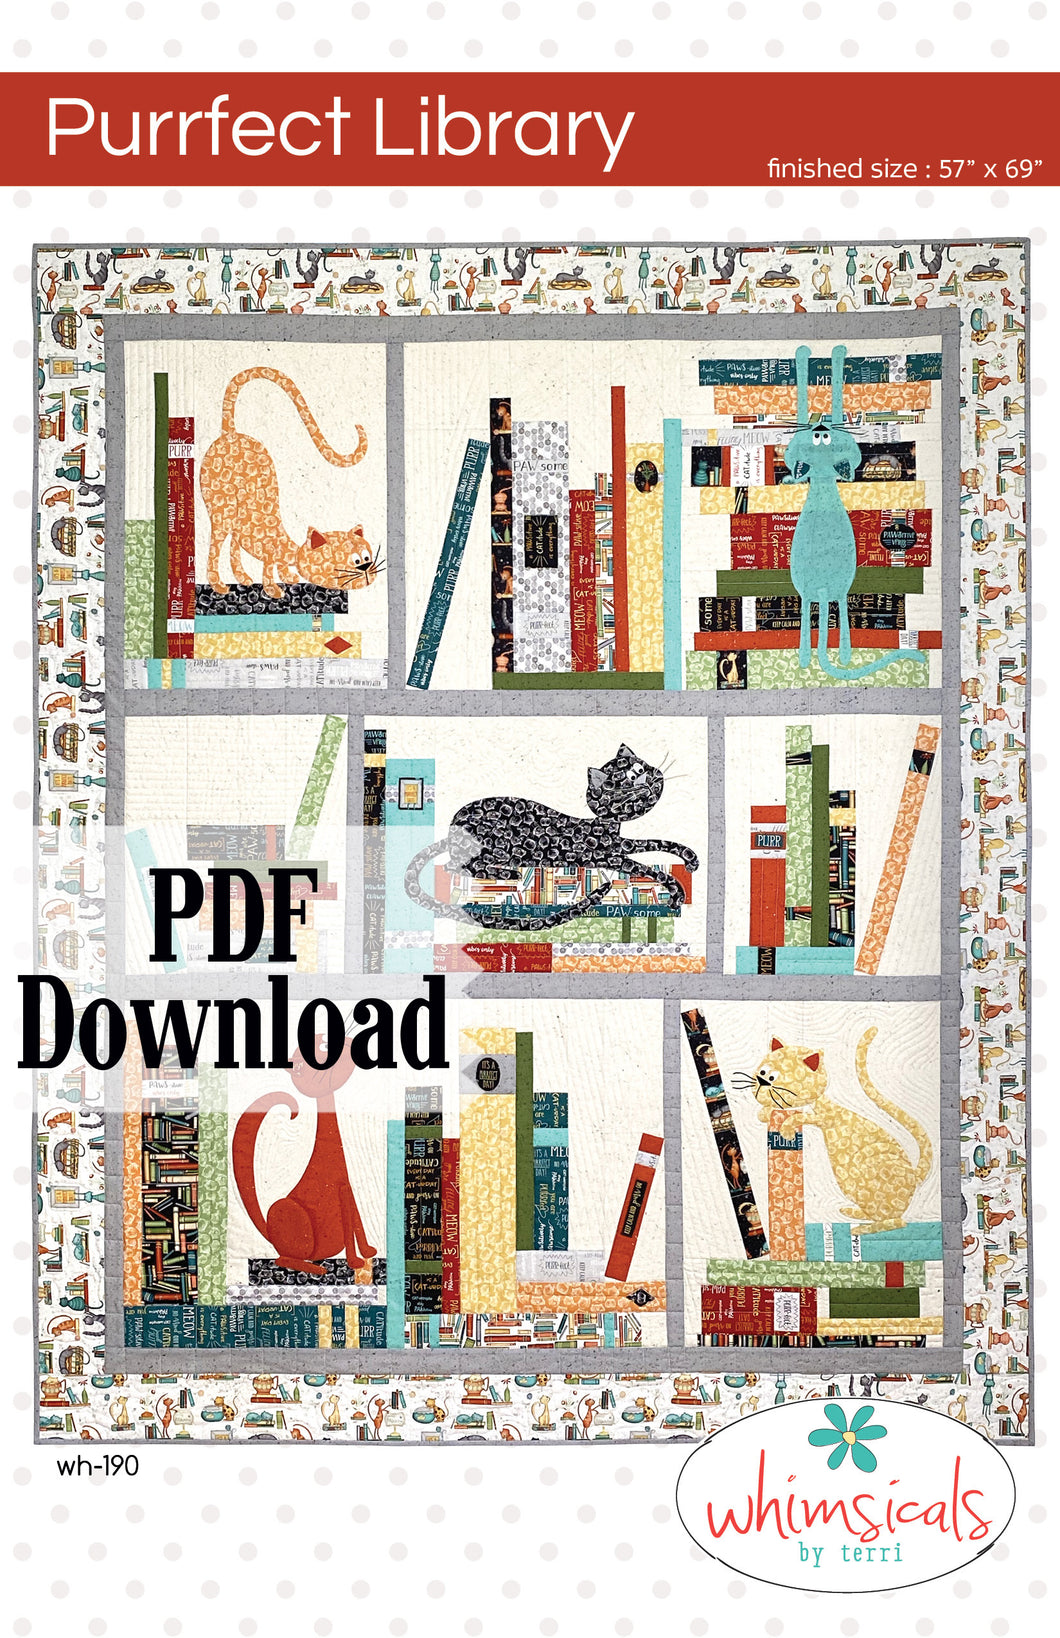 Purrfect Library PDF